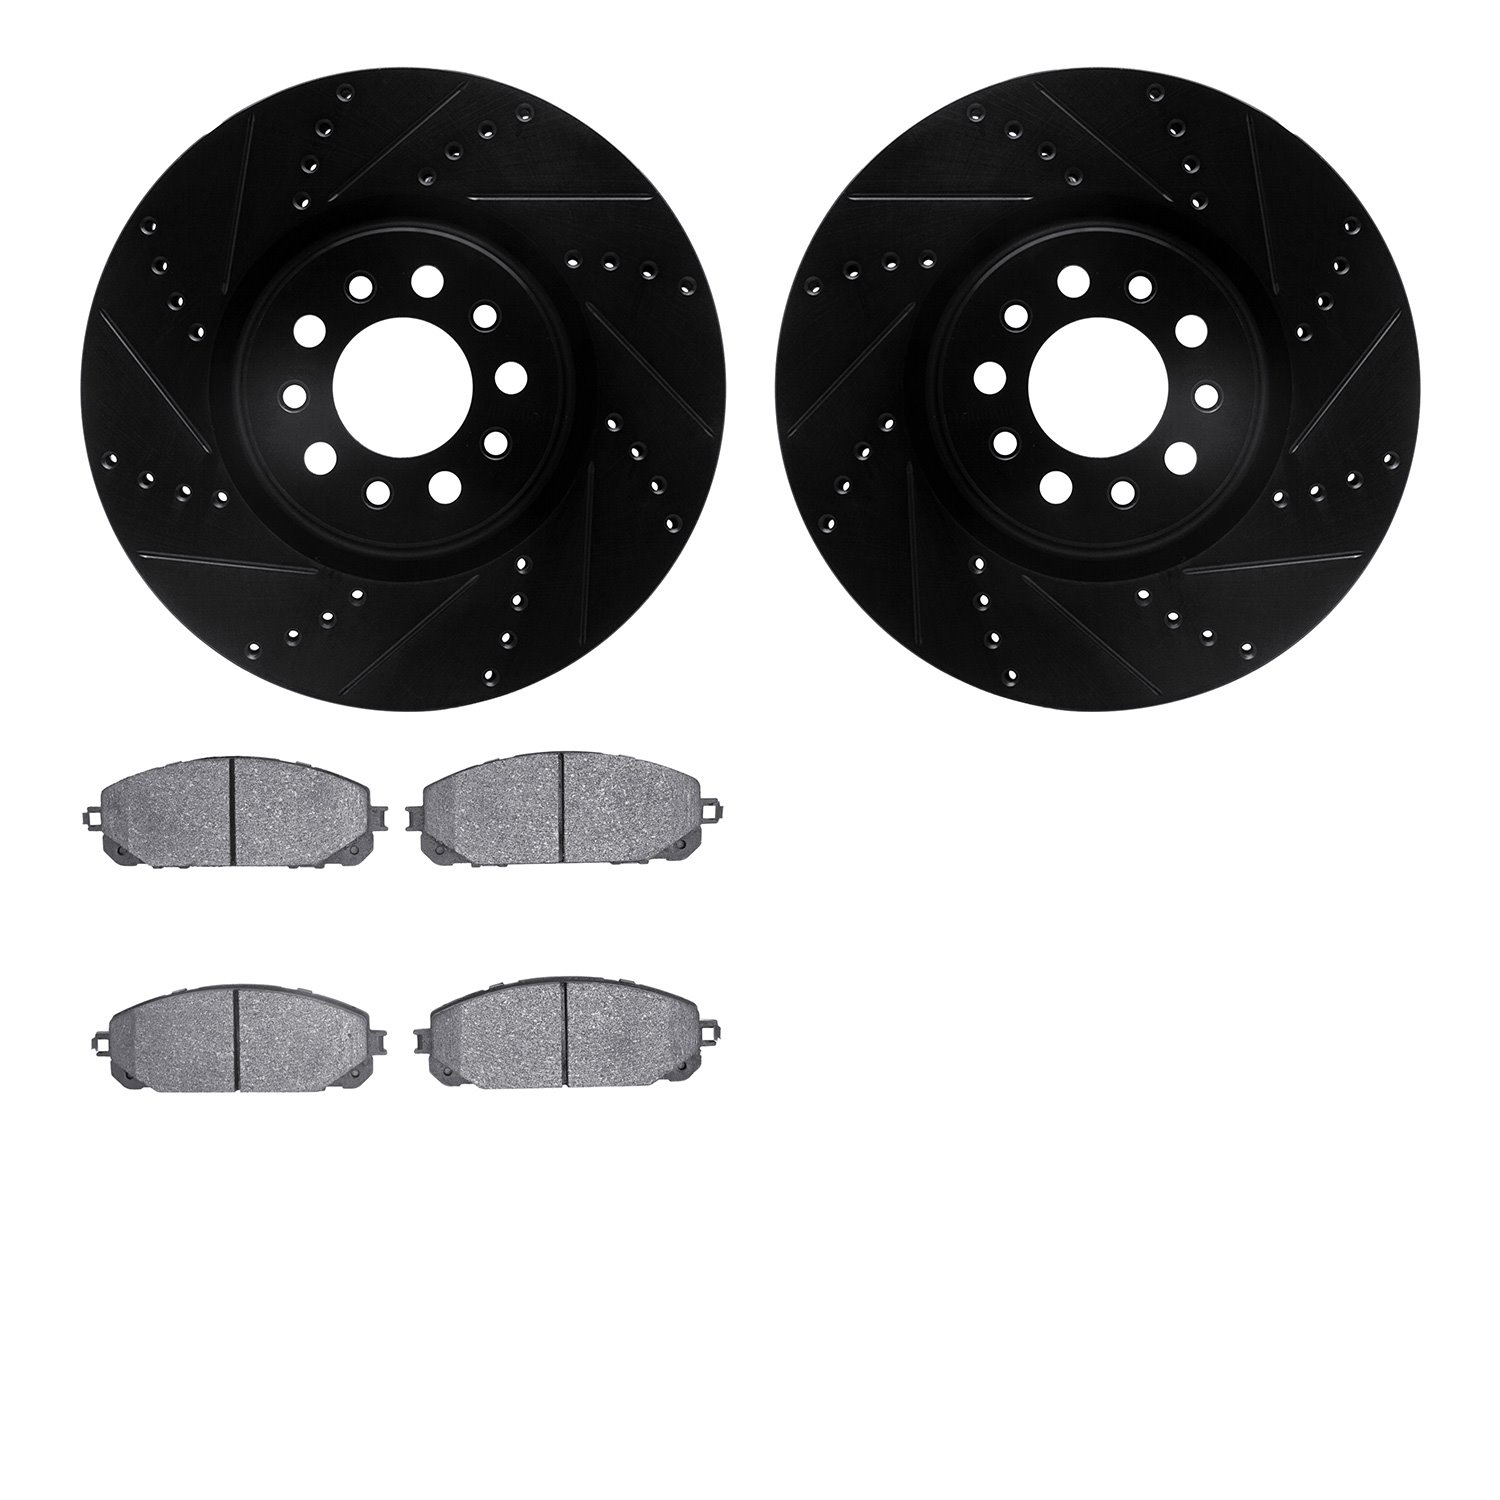 8402-42015 Drilled/Slotted Brake Rotors with Ultimate-Duty Brake Pads Kit [Black], Fits Select Mopar, Position: Front